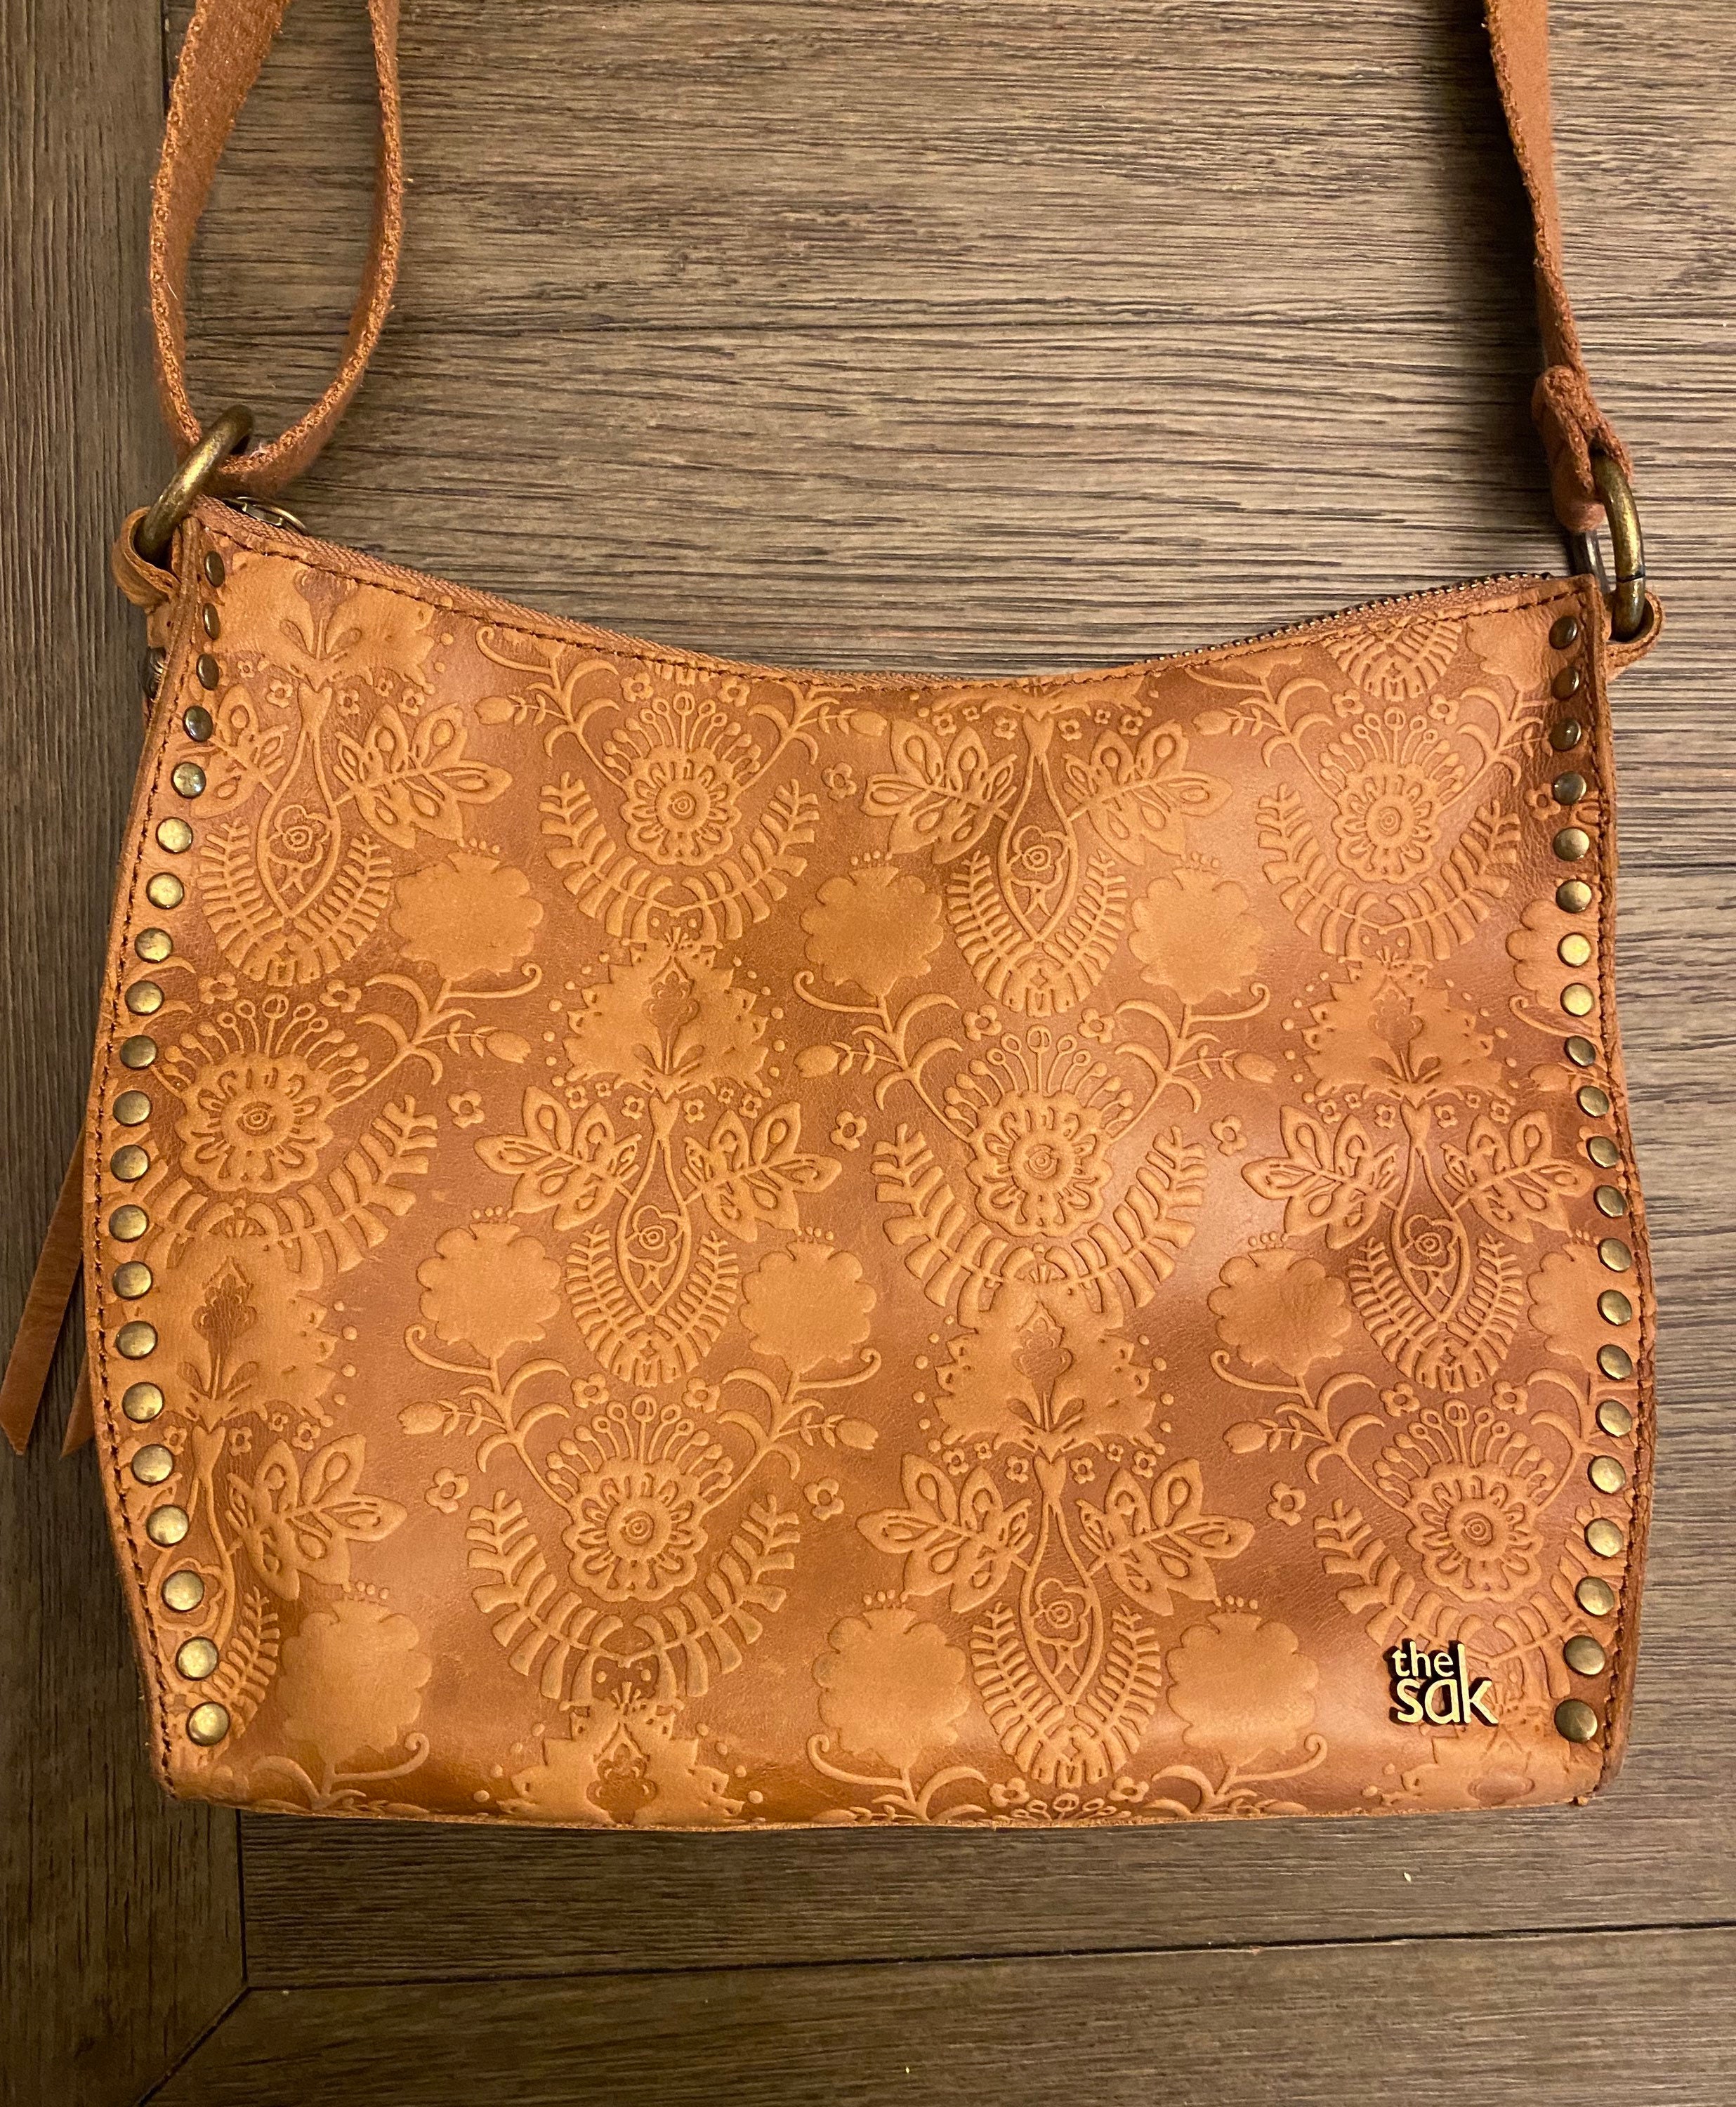 REVIEW} The Sak Sequoia Leather Hobo - Single Mother Survival Guide